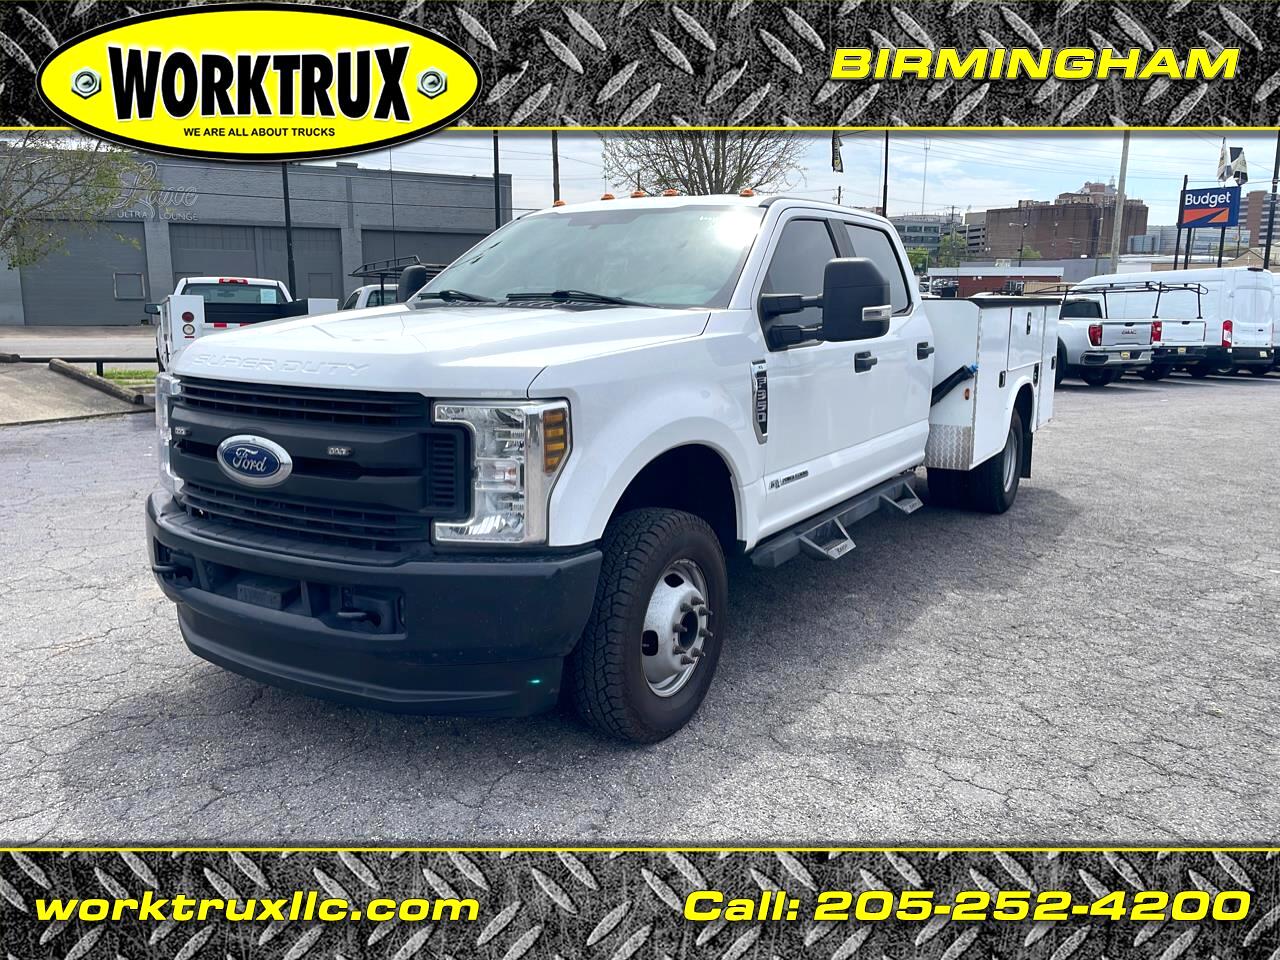 2019 Ford F-350 SD Limited Crew Cab Long Box 4WD DRW